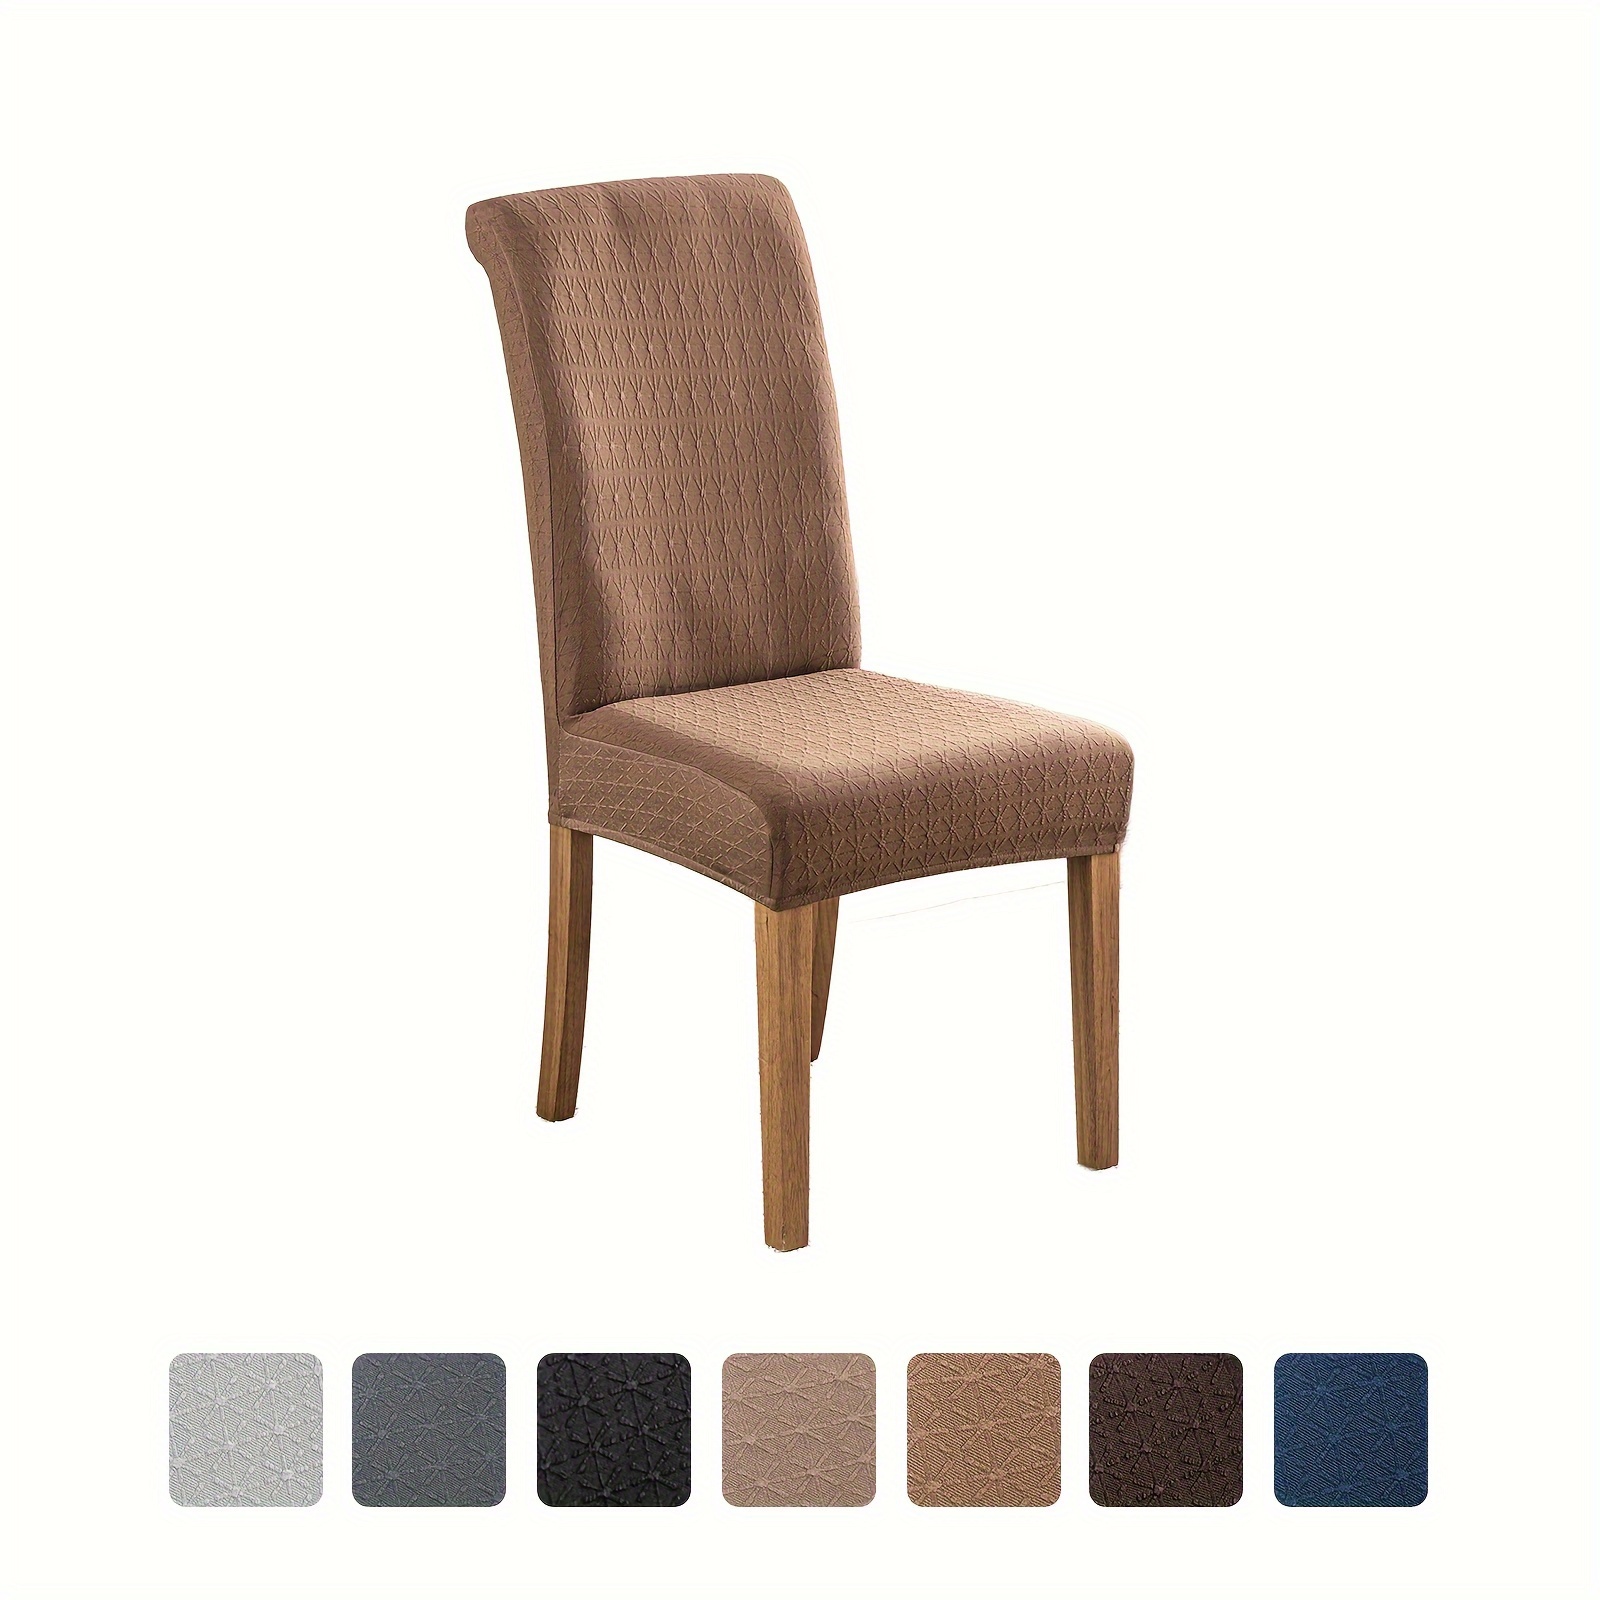 

4pcs/6pcs Waterproof Dining Room Chair Covers, Washable Removable Dining Chair Cover, Slipcover Chair Covers Stretchable, Suitable For Dining Room, Kitchen, Restaurant